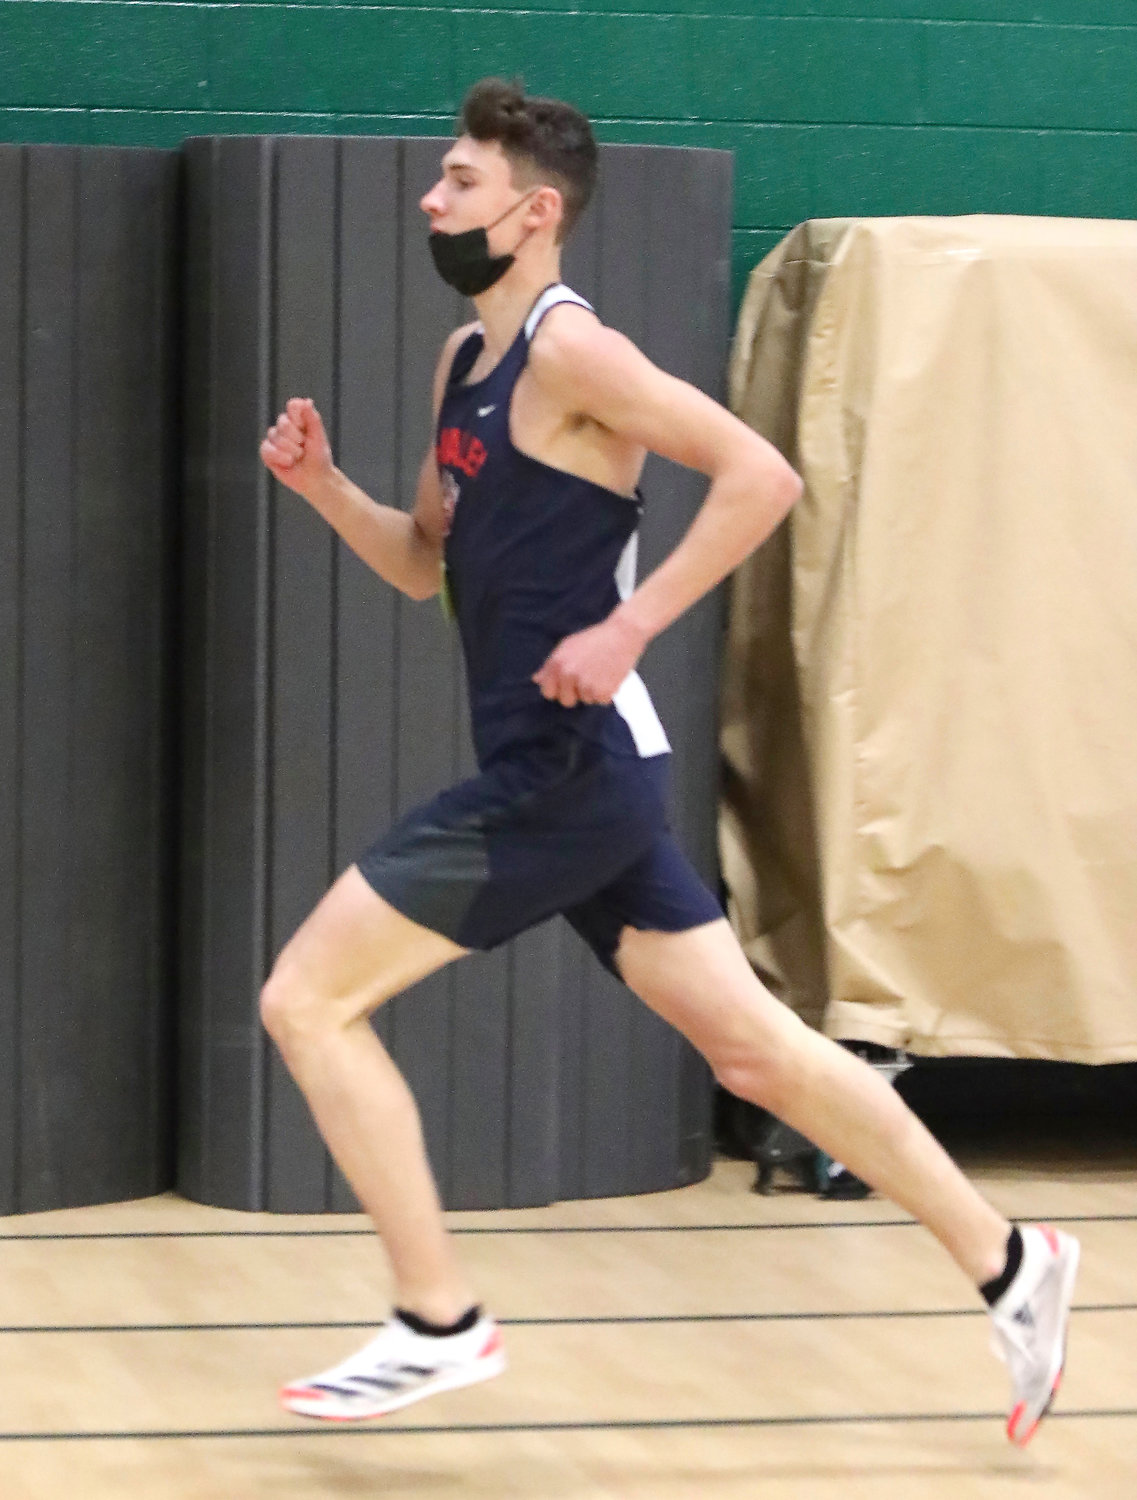 Tri-Valley’s Adam Furman is our county’s best hope at states. He is currently ranked first in NYS with a time of 9:37.69. Though he did not compete at sectionals, he will be at the state qualifier on February 26 at the New York Armory.